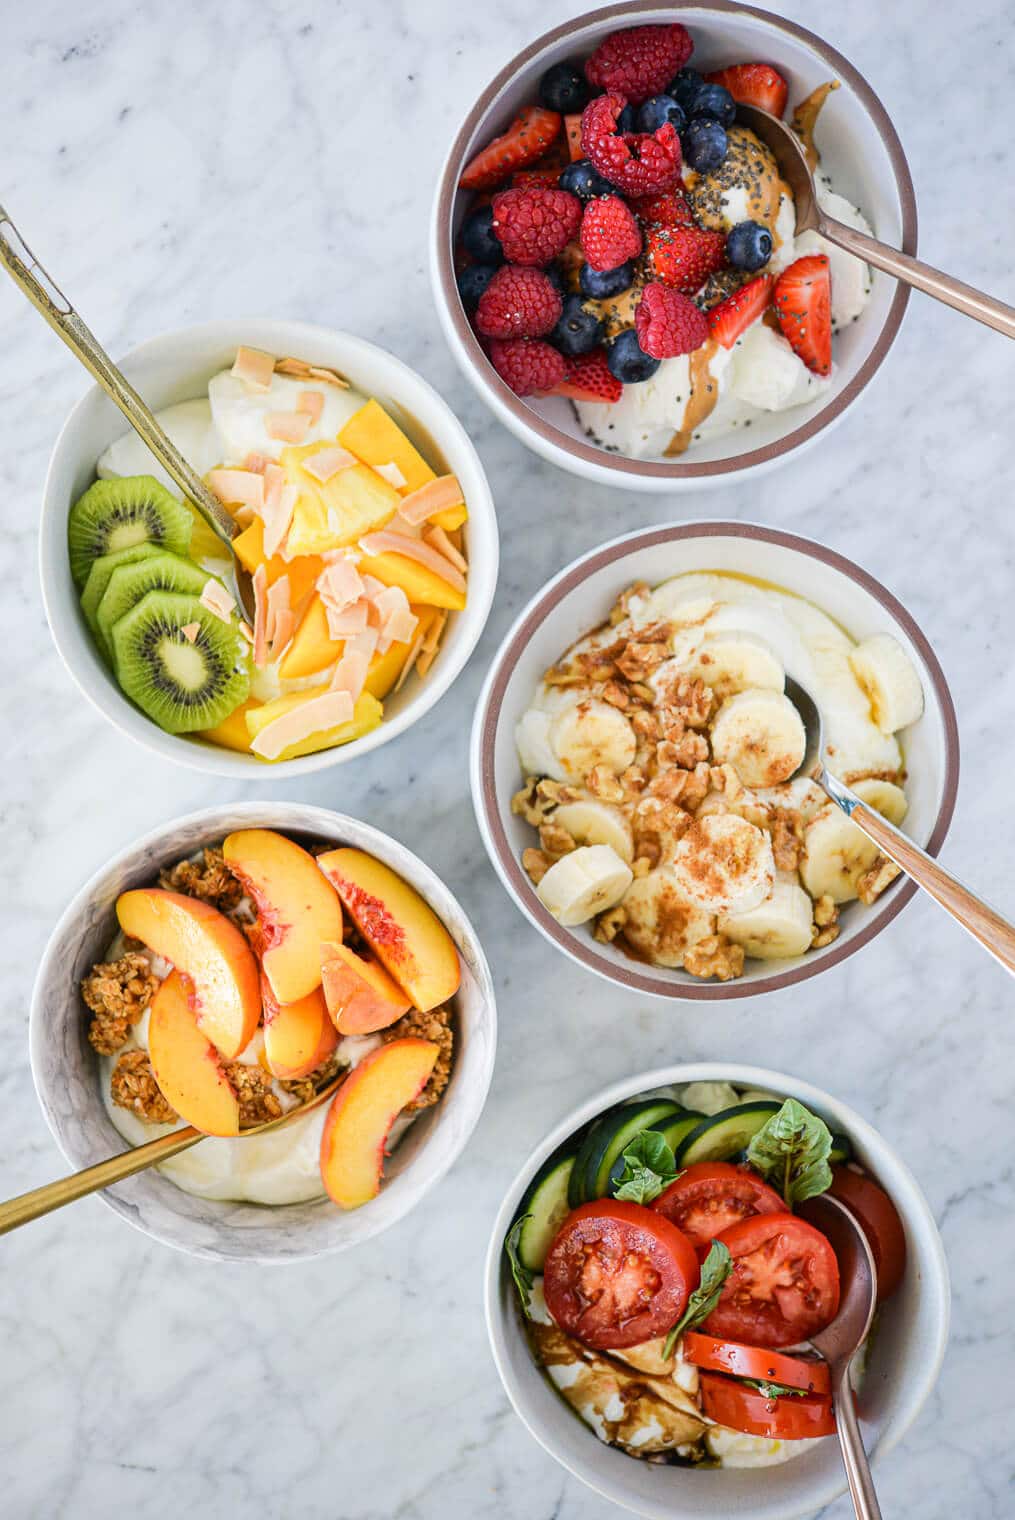 Top view of 5 Greek yogurt bowls (tropical, berry, peaches and cream, banana nut, and cucumber caprese) on a marble surface